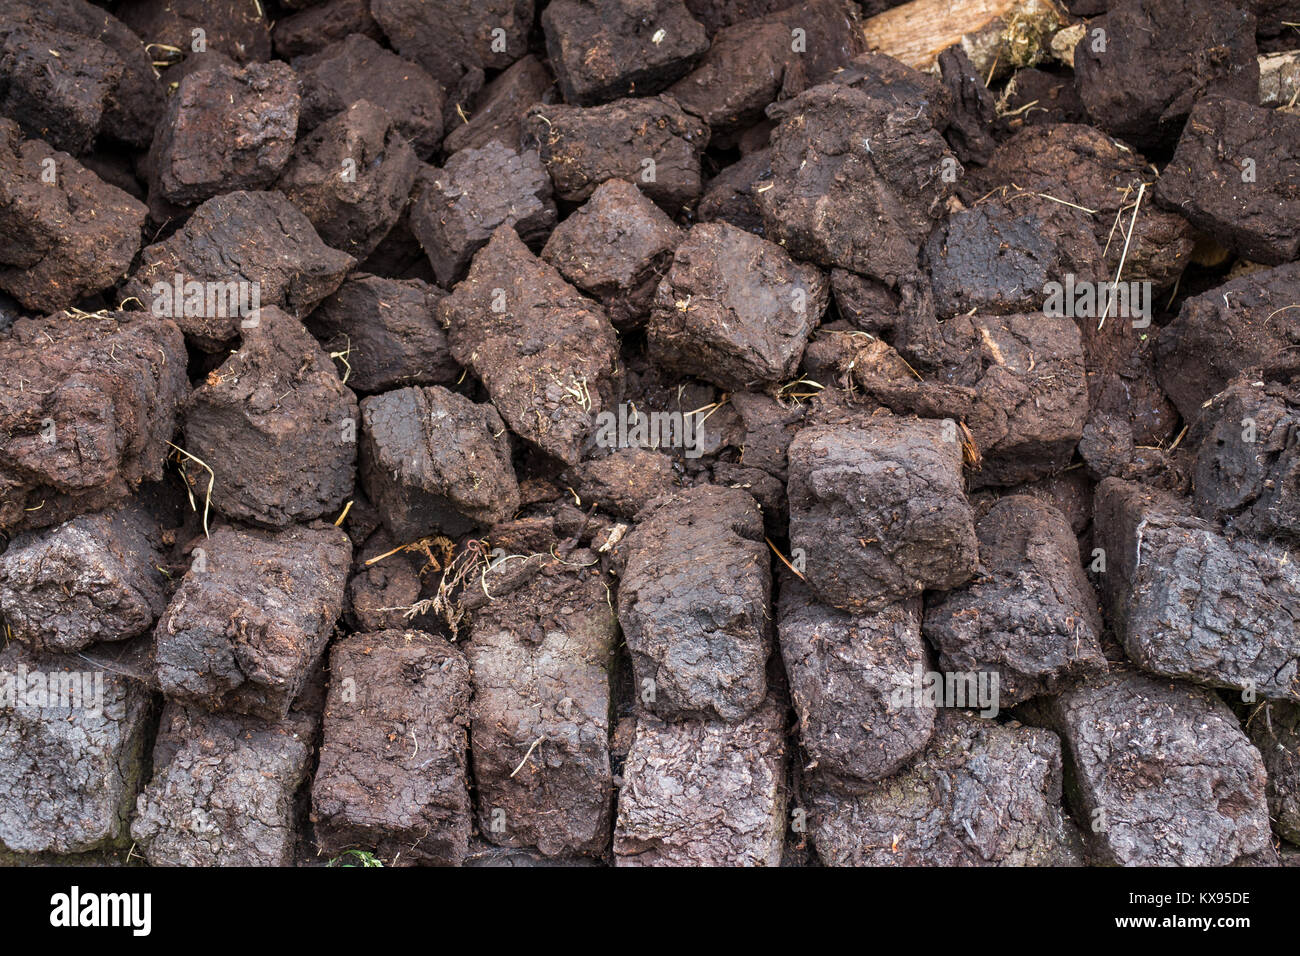 cutted peat, Ireland, Europe Stock Photo